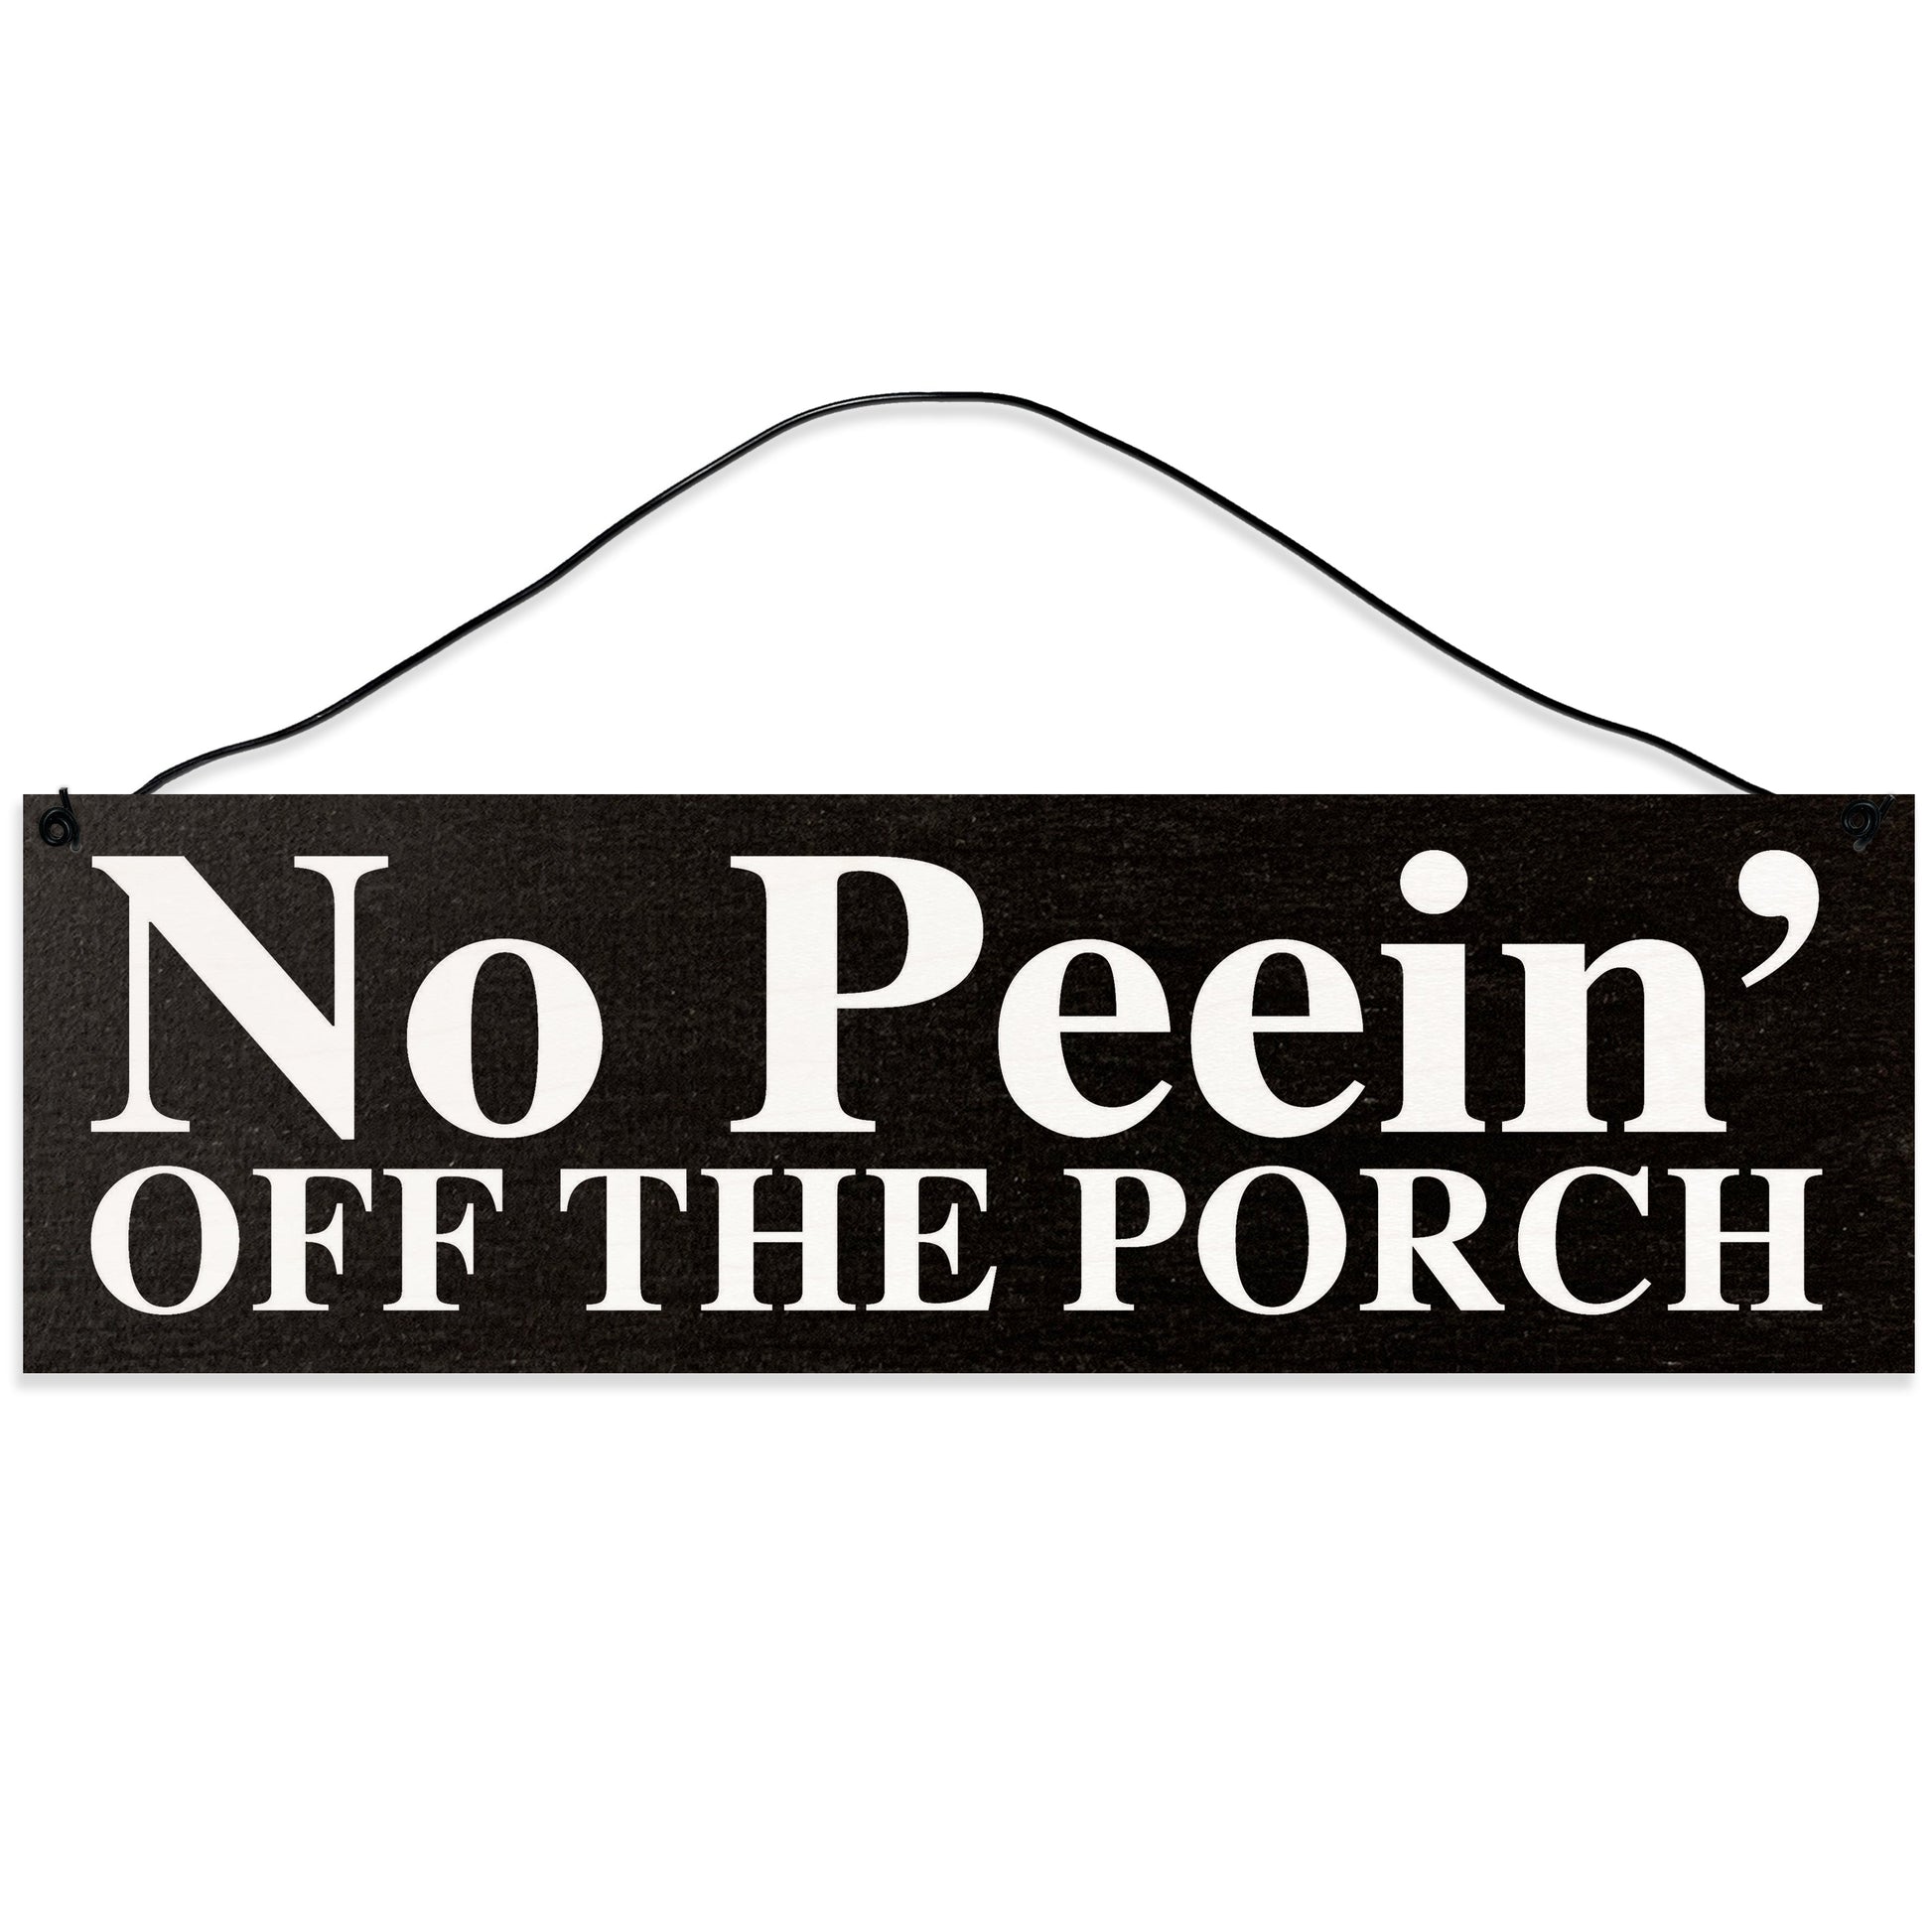 Sawyer's Mill - No Peein' Off The Porch. Wood Sign for Home or Office. Measures 3x10 inches.